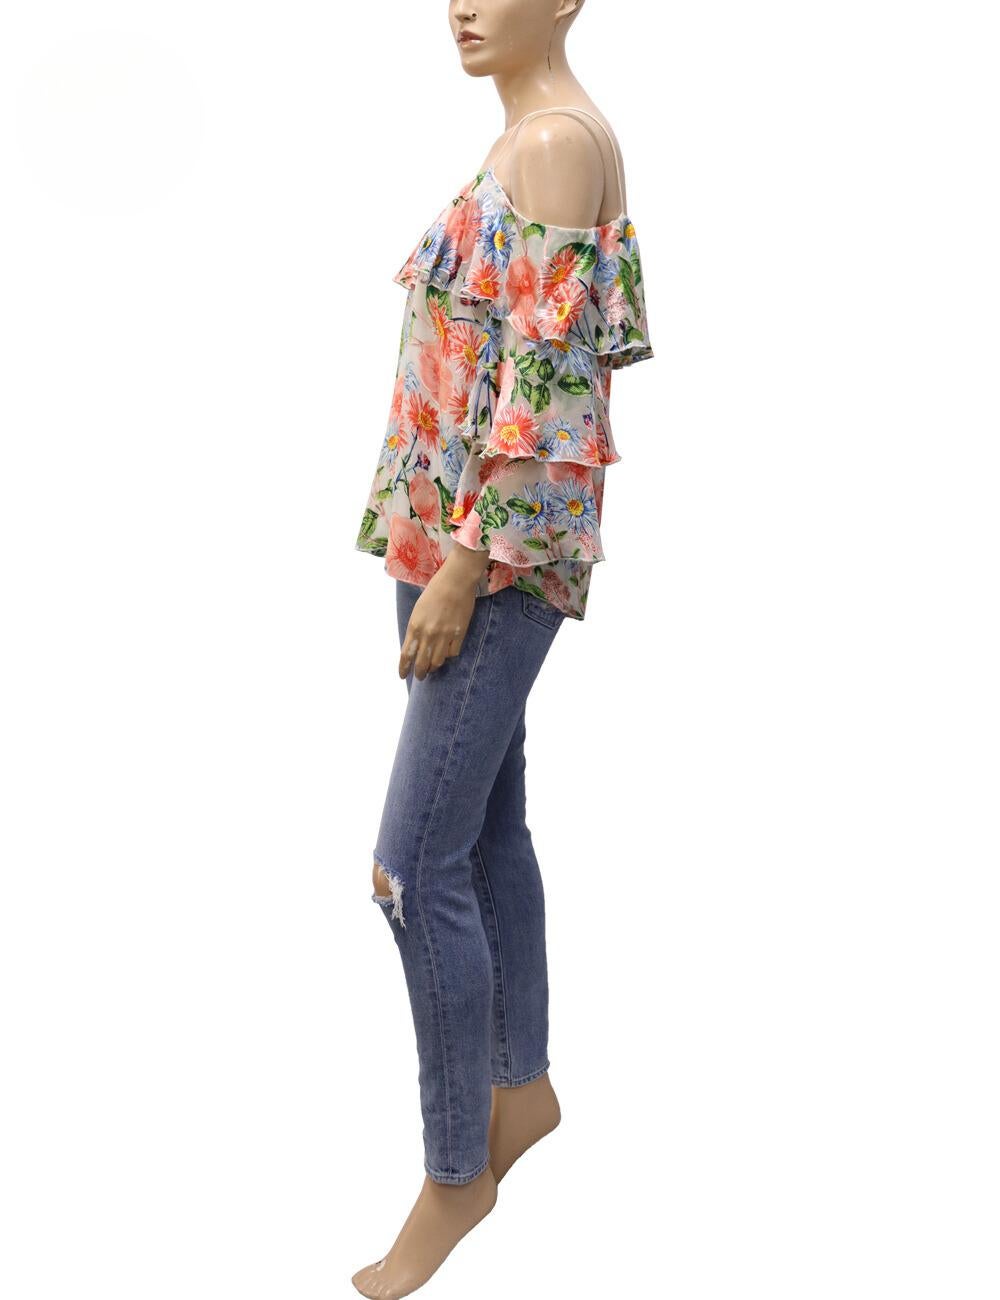 Alice + Olivia Allover Floral Top Size Small In New Condition For Sale In Amman, JO